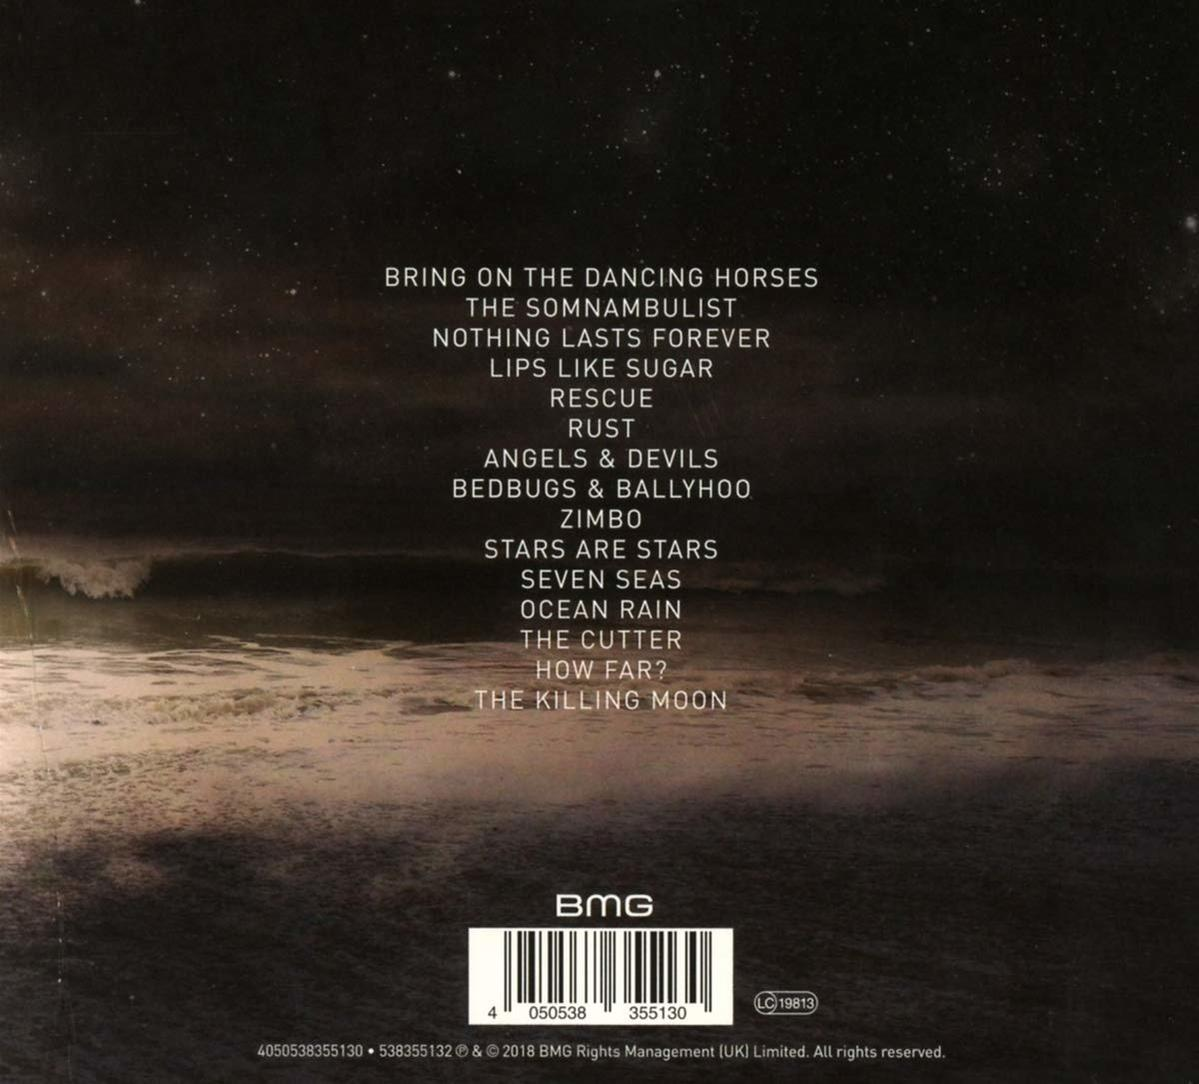 Bunnymen - & The Stars,The The & Echo Oceans (CD) The - Moon